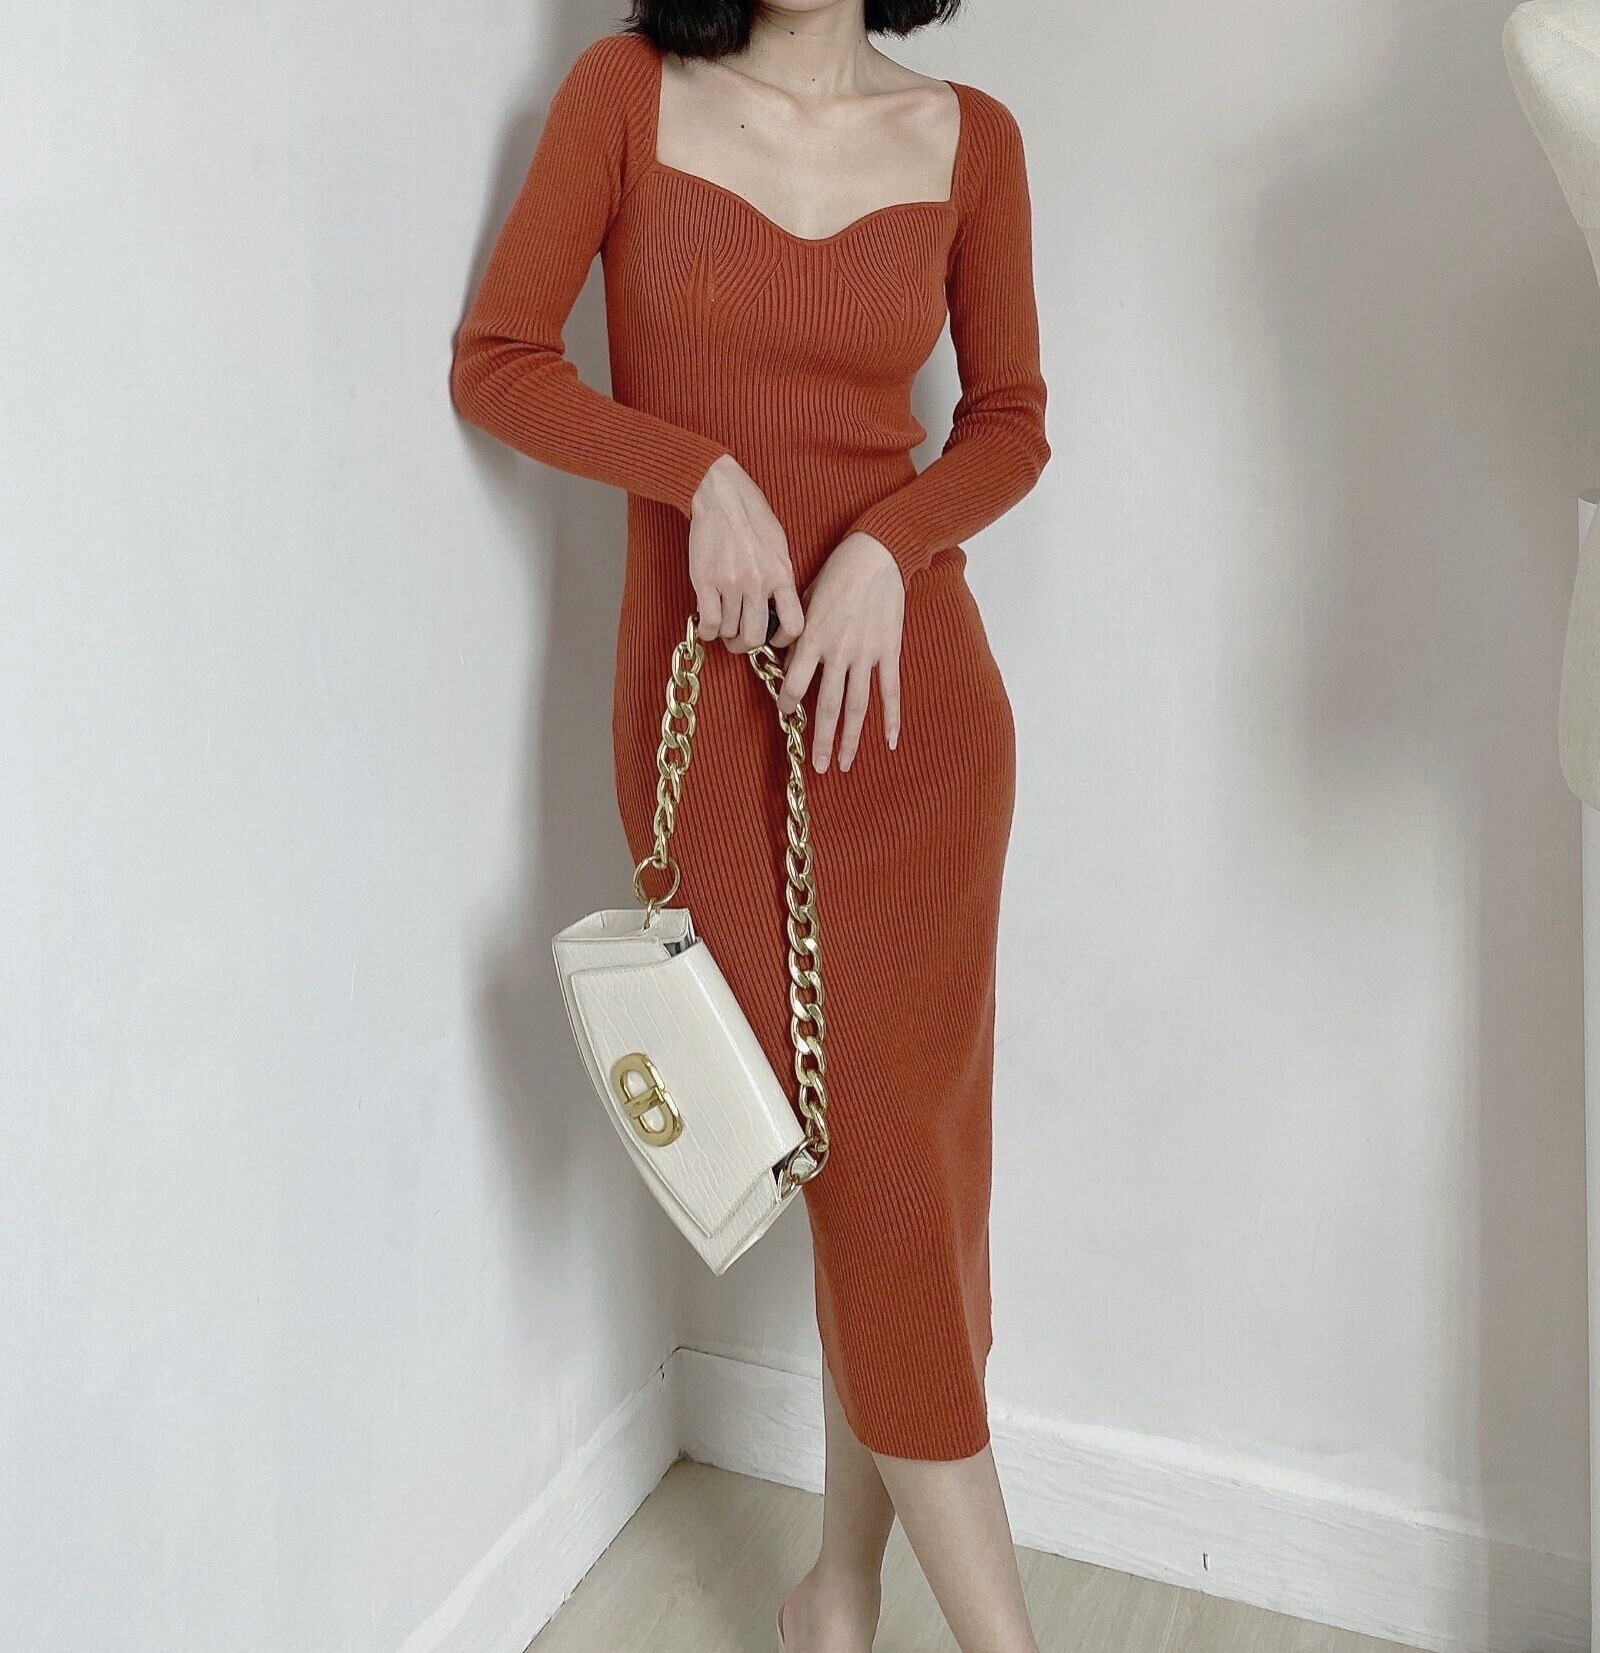 Square Neck Ribbed Thicken Warm Long Sleeve High Stretch Bodycon Knitted Dress in Dresses